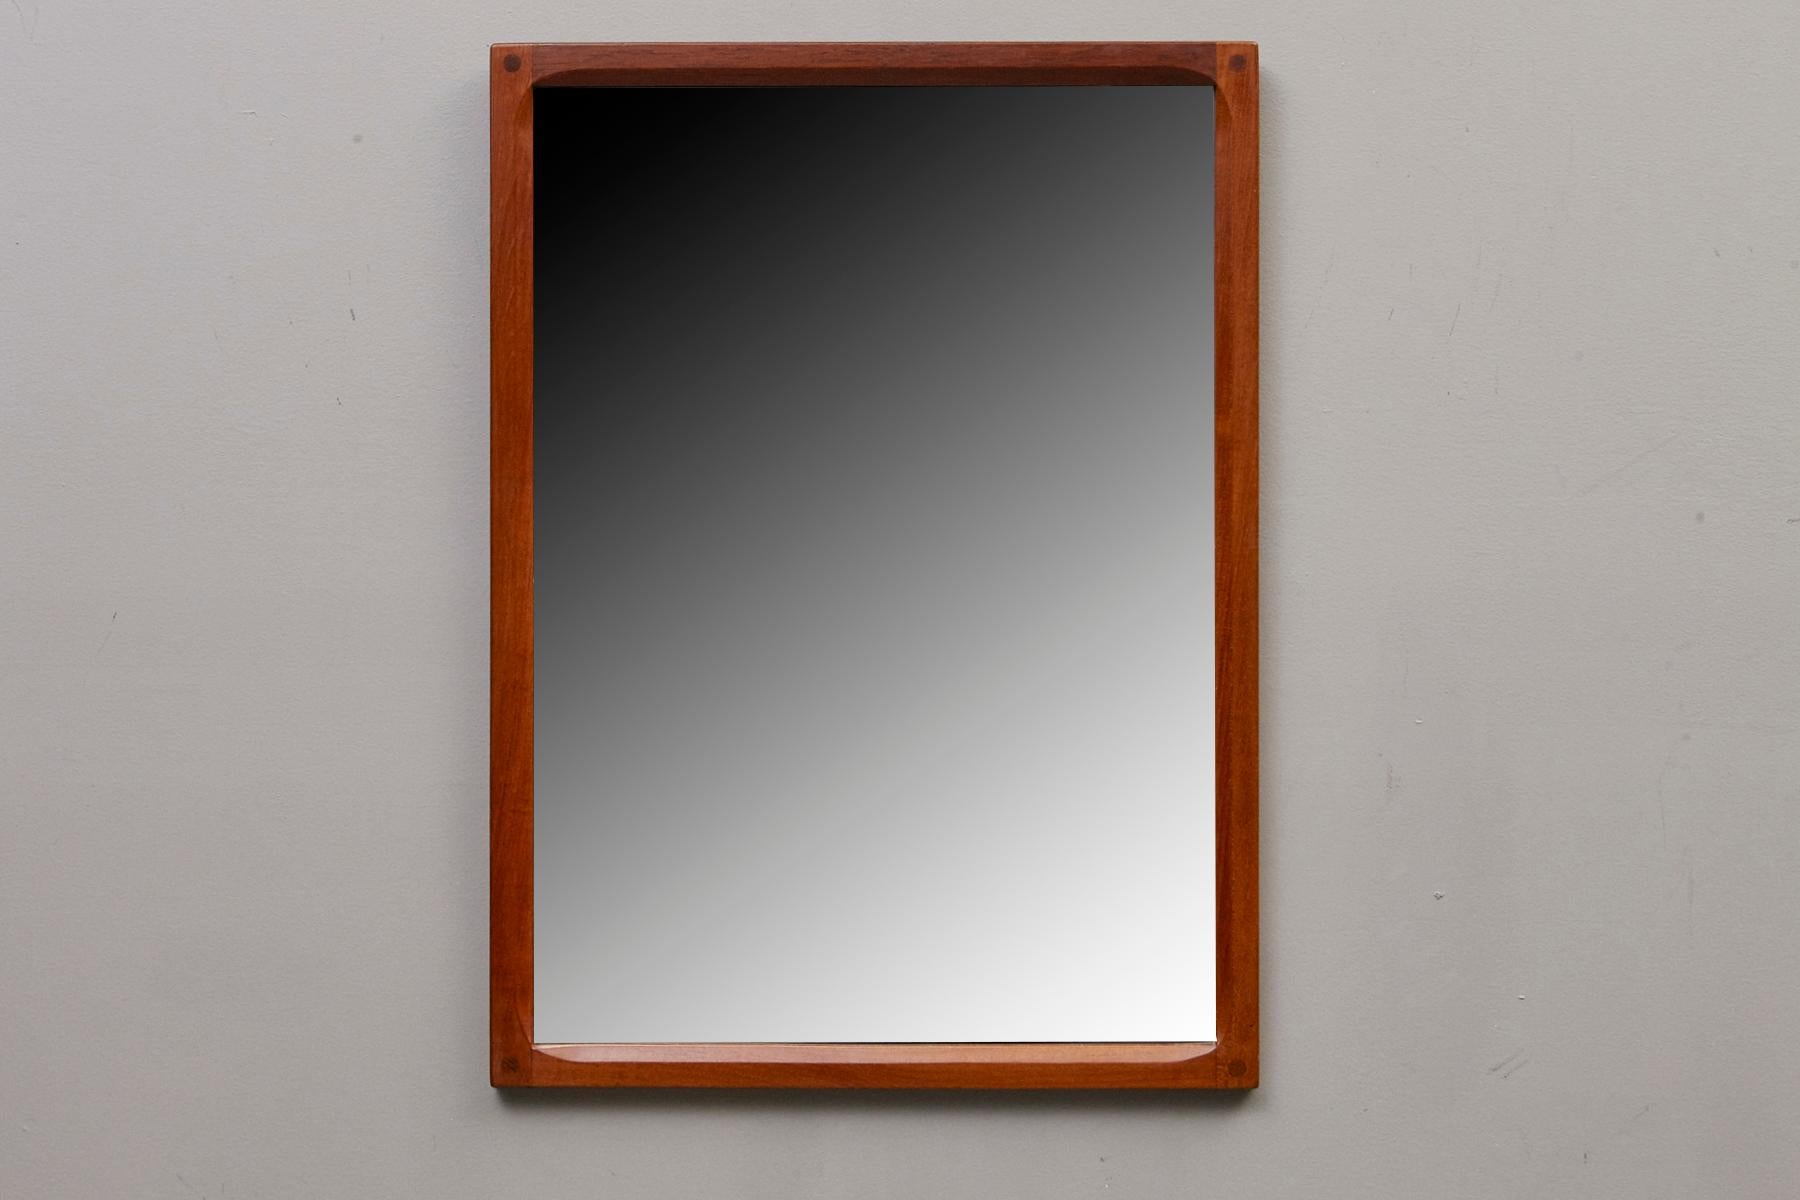 Beautiful handcrafted teak mirror clean lines and a Minimalist esthetic.
Intricate joinery and slightly rounded teak frame on the inside. The mirror has a beautiful patina.
Designed by Kai Kristiansen and manufactured by Aksel Kjersgaard A/S in